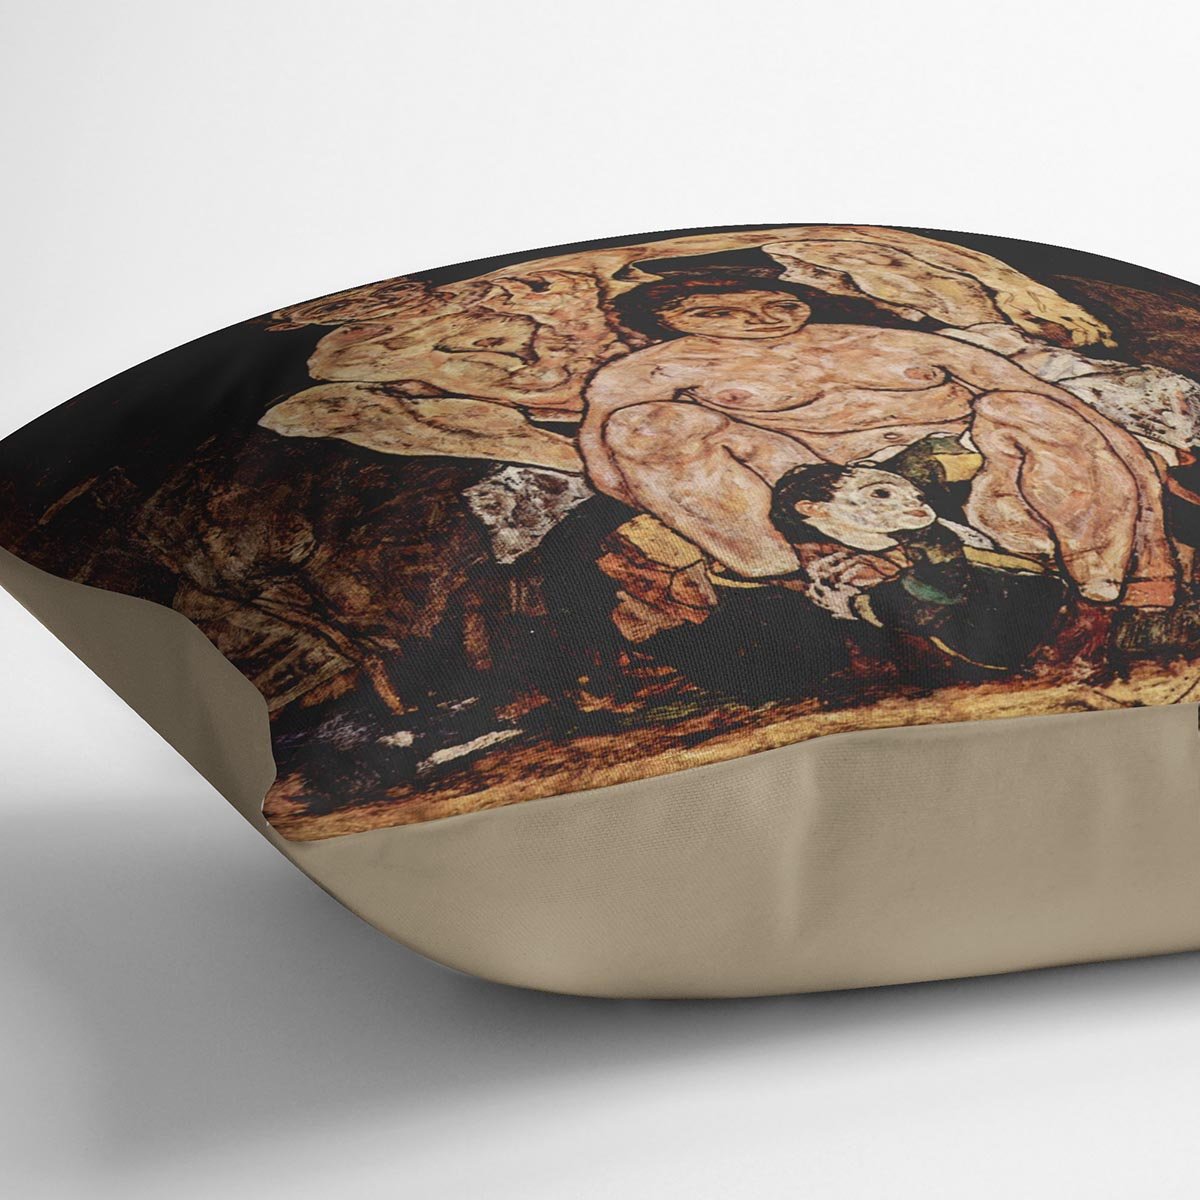 The Family by Egon Schiele Cushion